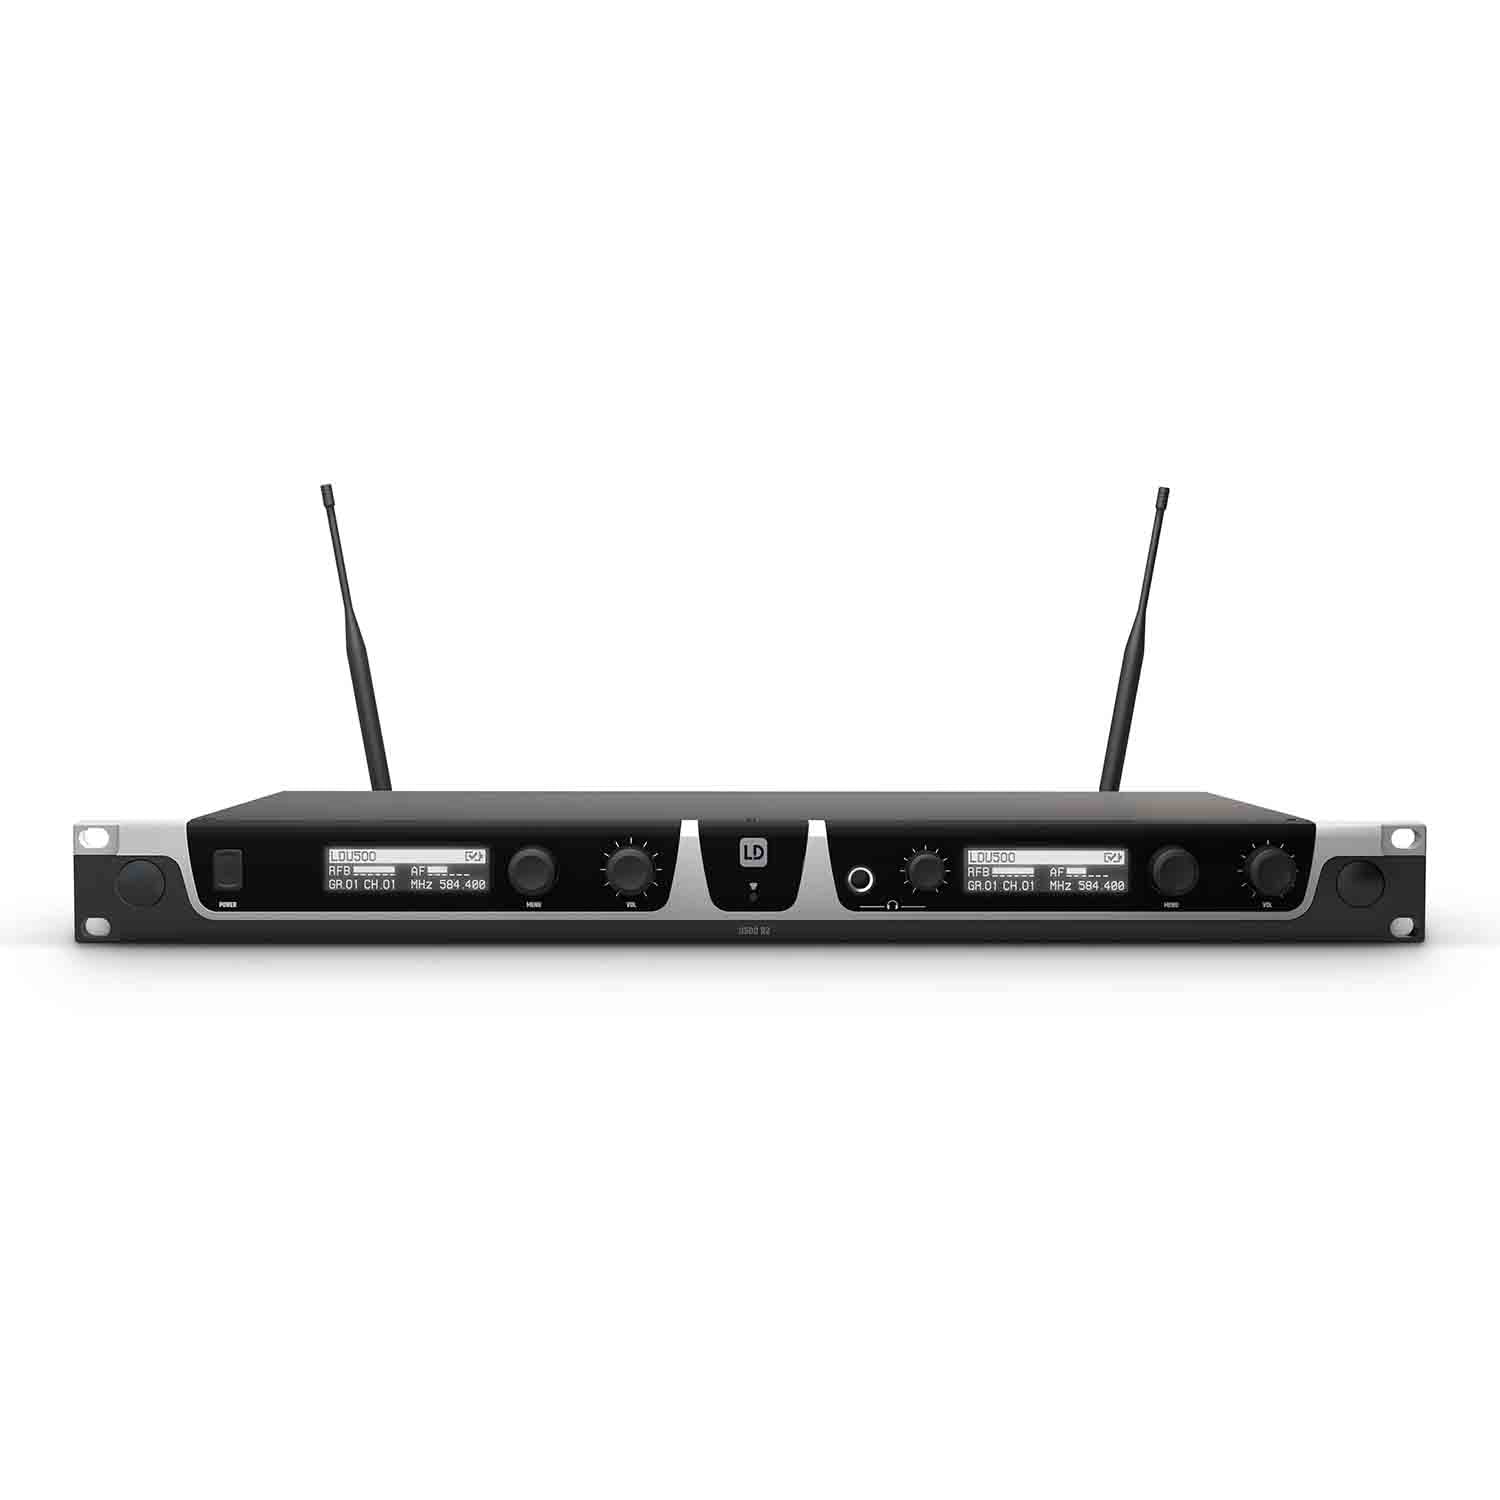 LD Systems U505 BPH 2 Dual Wireless Microphone System with 2 x Bodypack and 2 x Headset (584 - 608 MHz) - Hollywood DJ